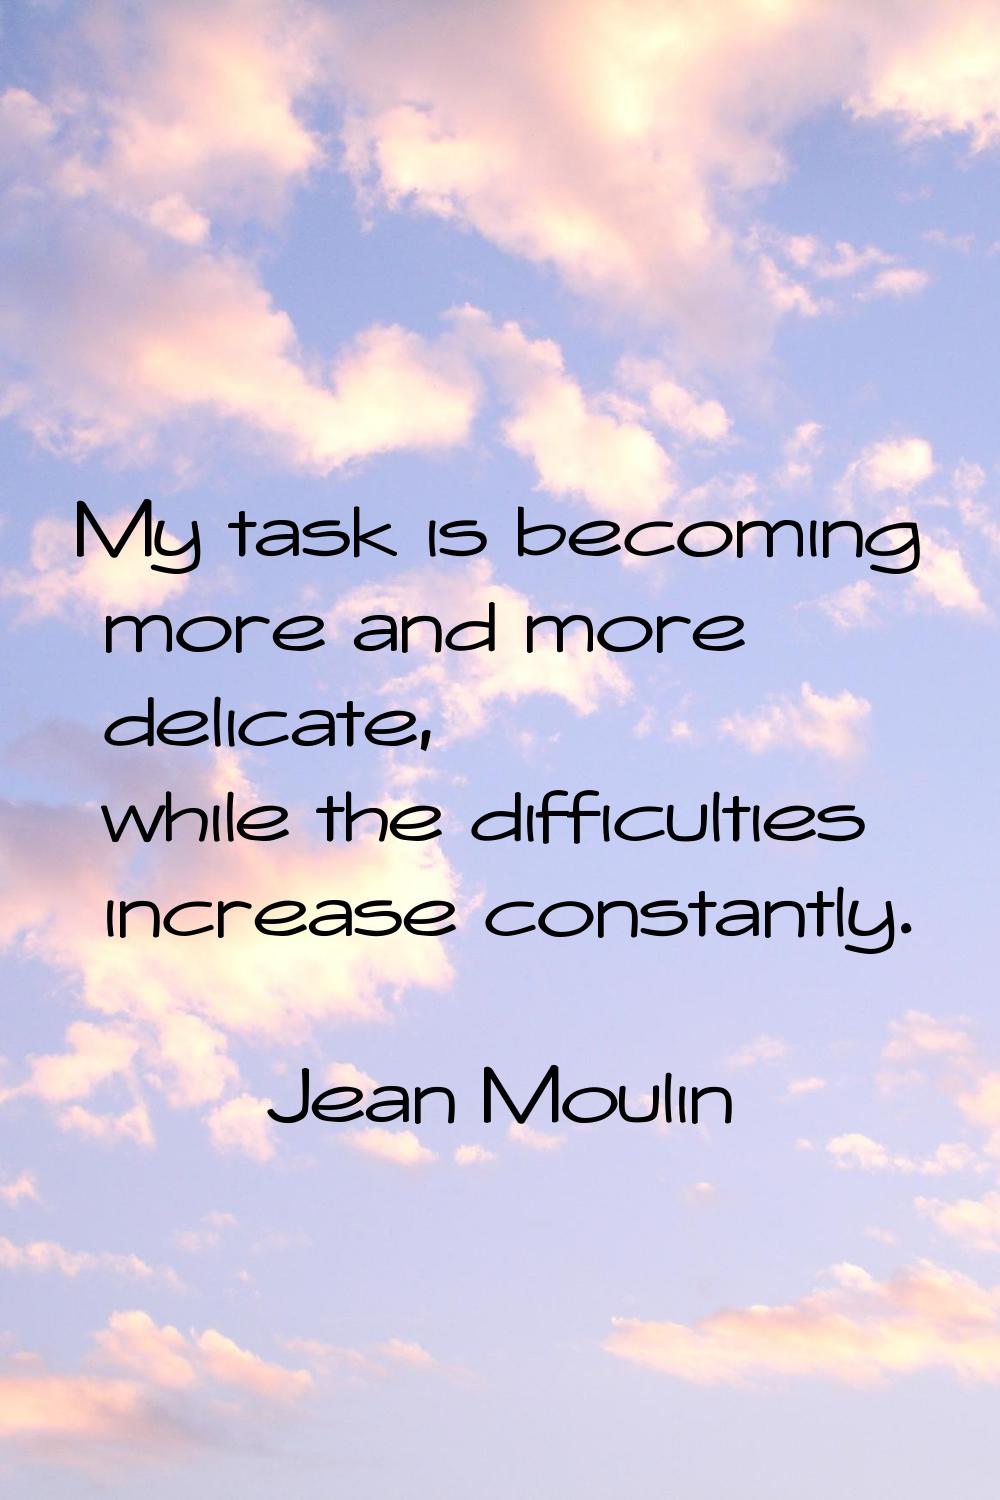 My task is becoming more and more delicate, while the difficulties increase constantly.